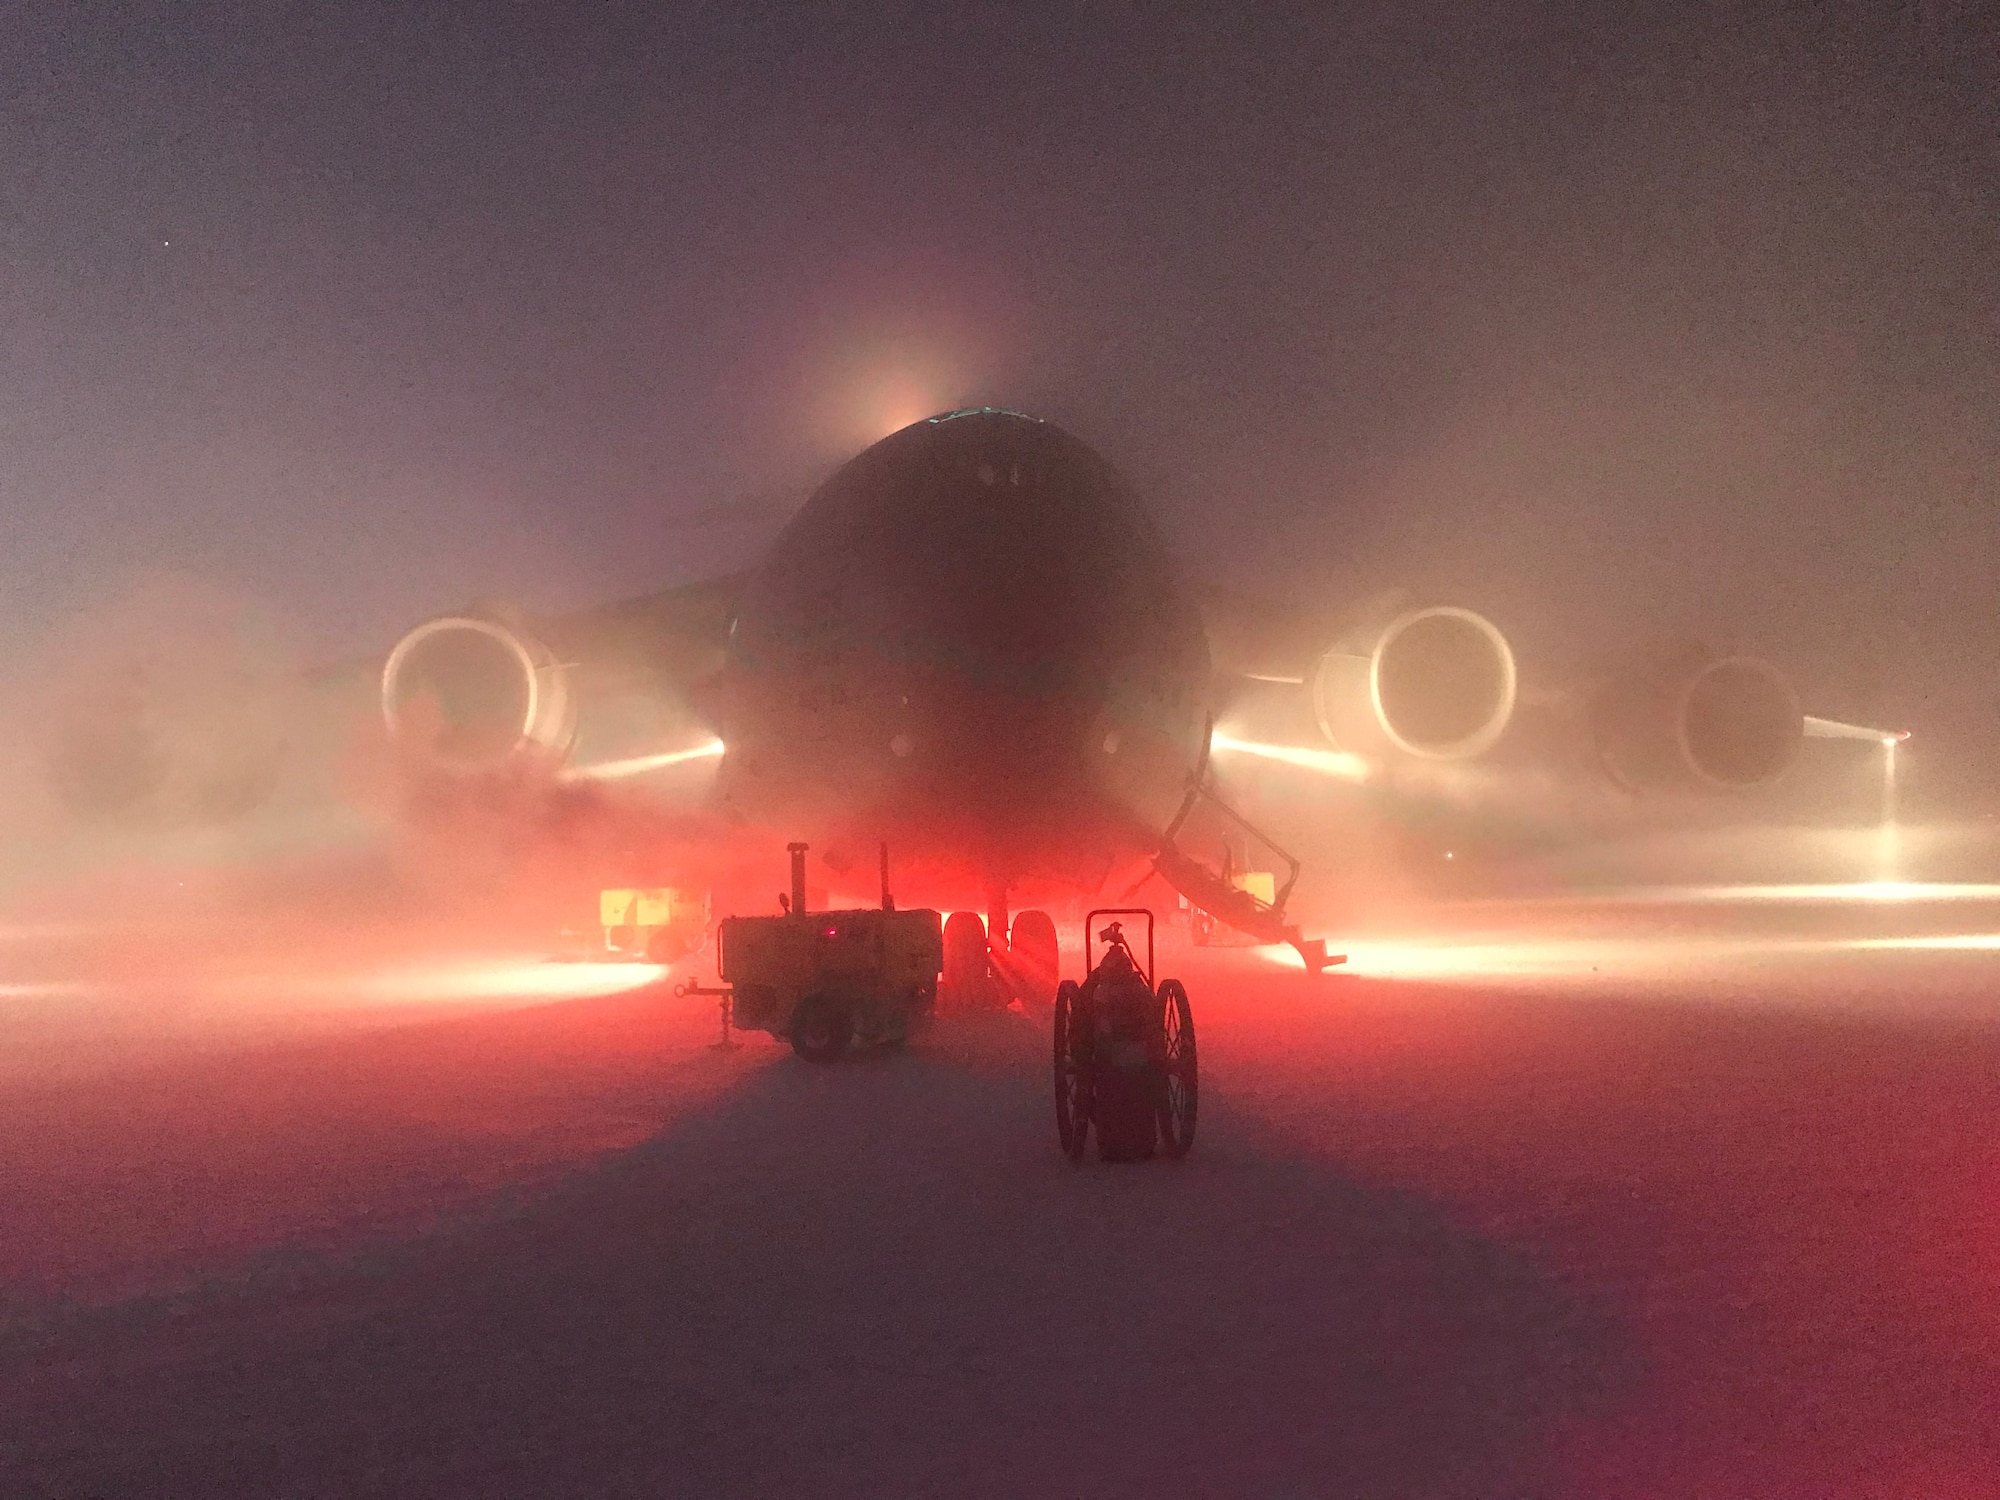 A C-17 Globmaster III sits on the runway at McMurdo Station in Antarctic. At the request of the National Science Foundation, aircrews from the 304th Expeditionary Air Squadron supported an emergency medical evacuation of two patients Aug. 25. (Courtesy photo)